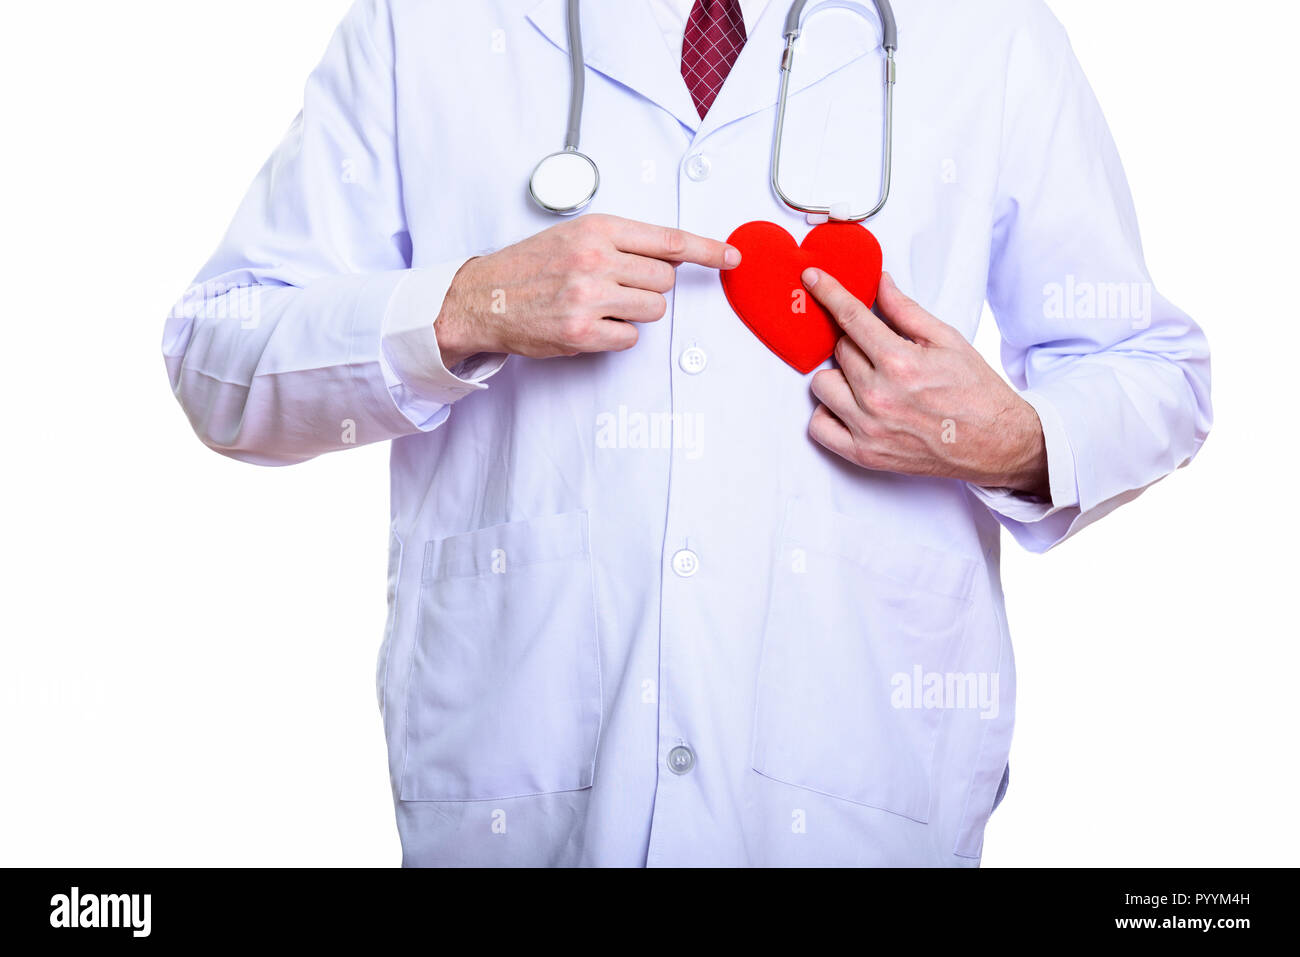 Doctor Coat Medical Stethoscope Red Heart Stock Photo 1236871573